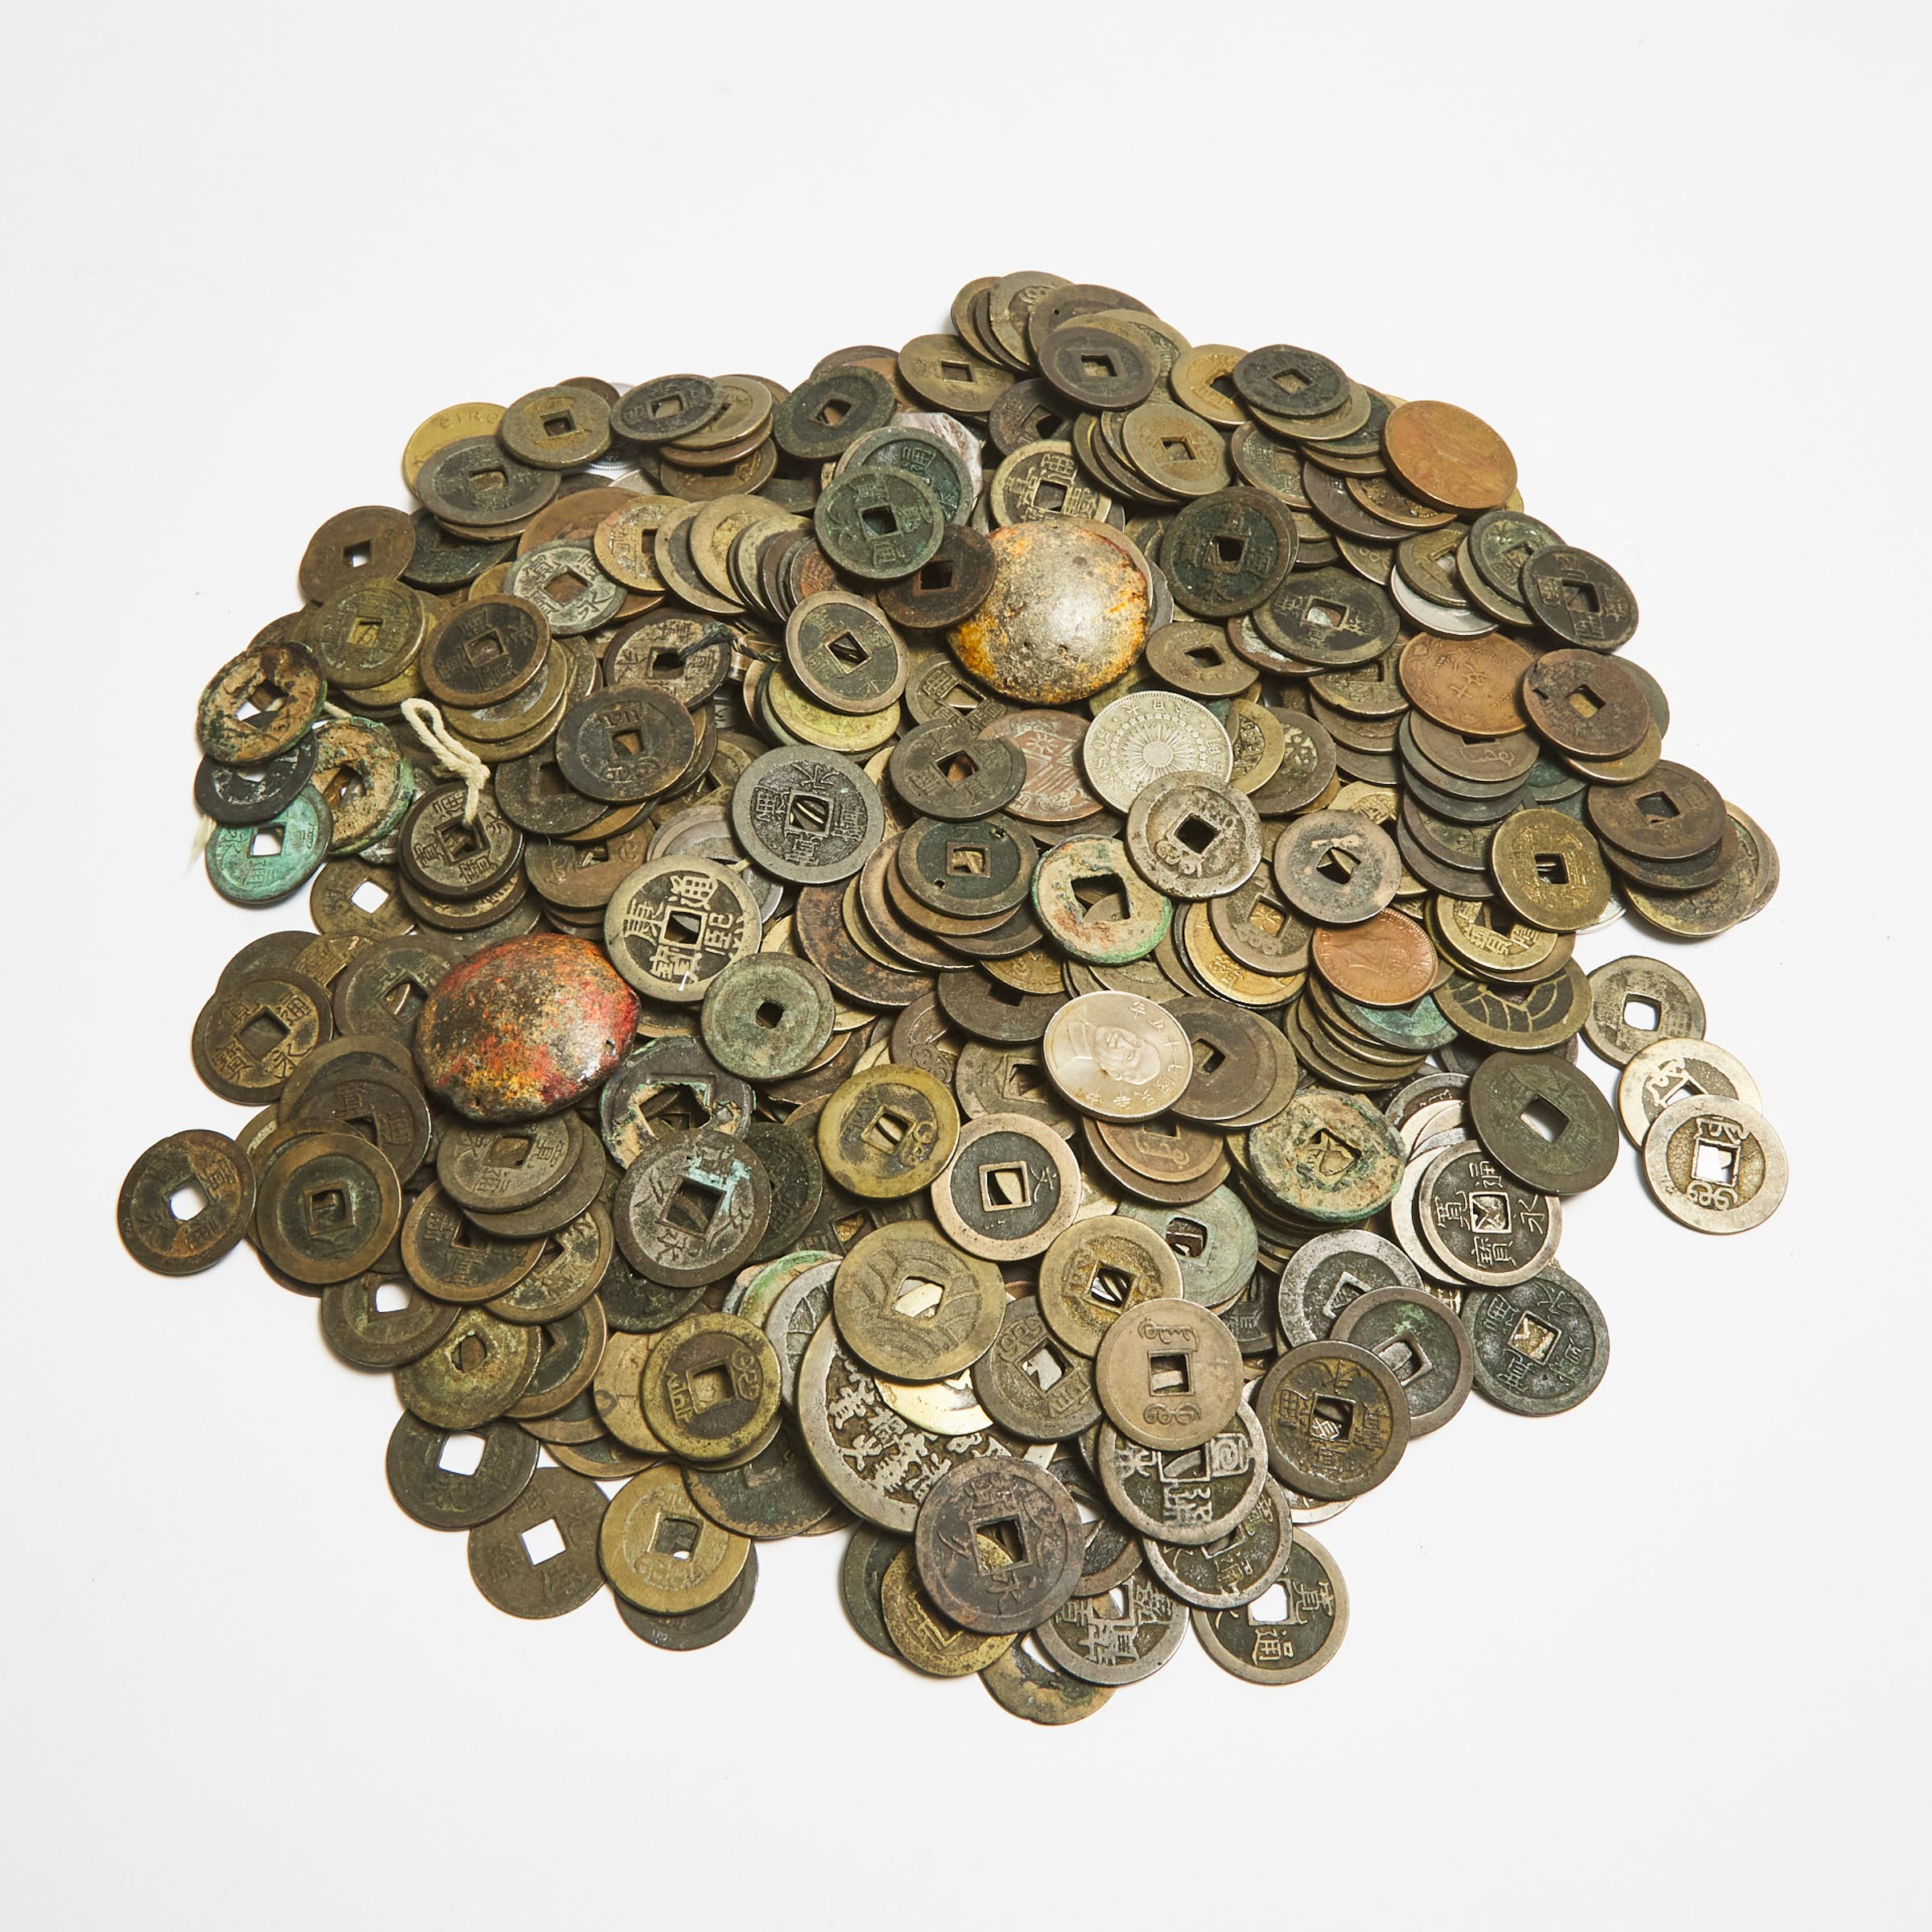 A Group of Four Hundred and Twenty-Three Cash Coins